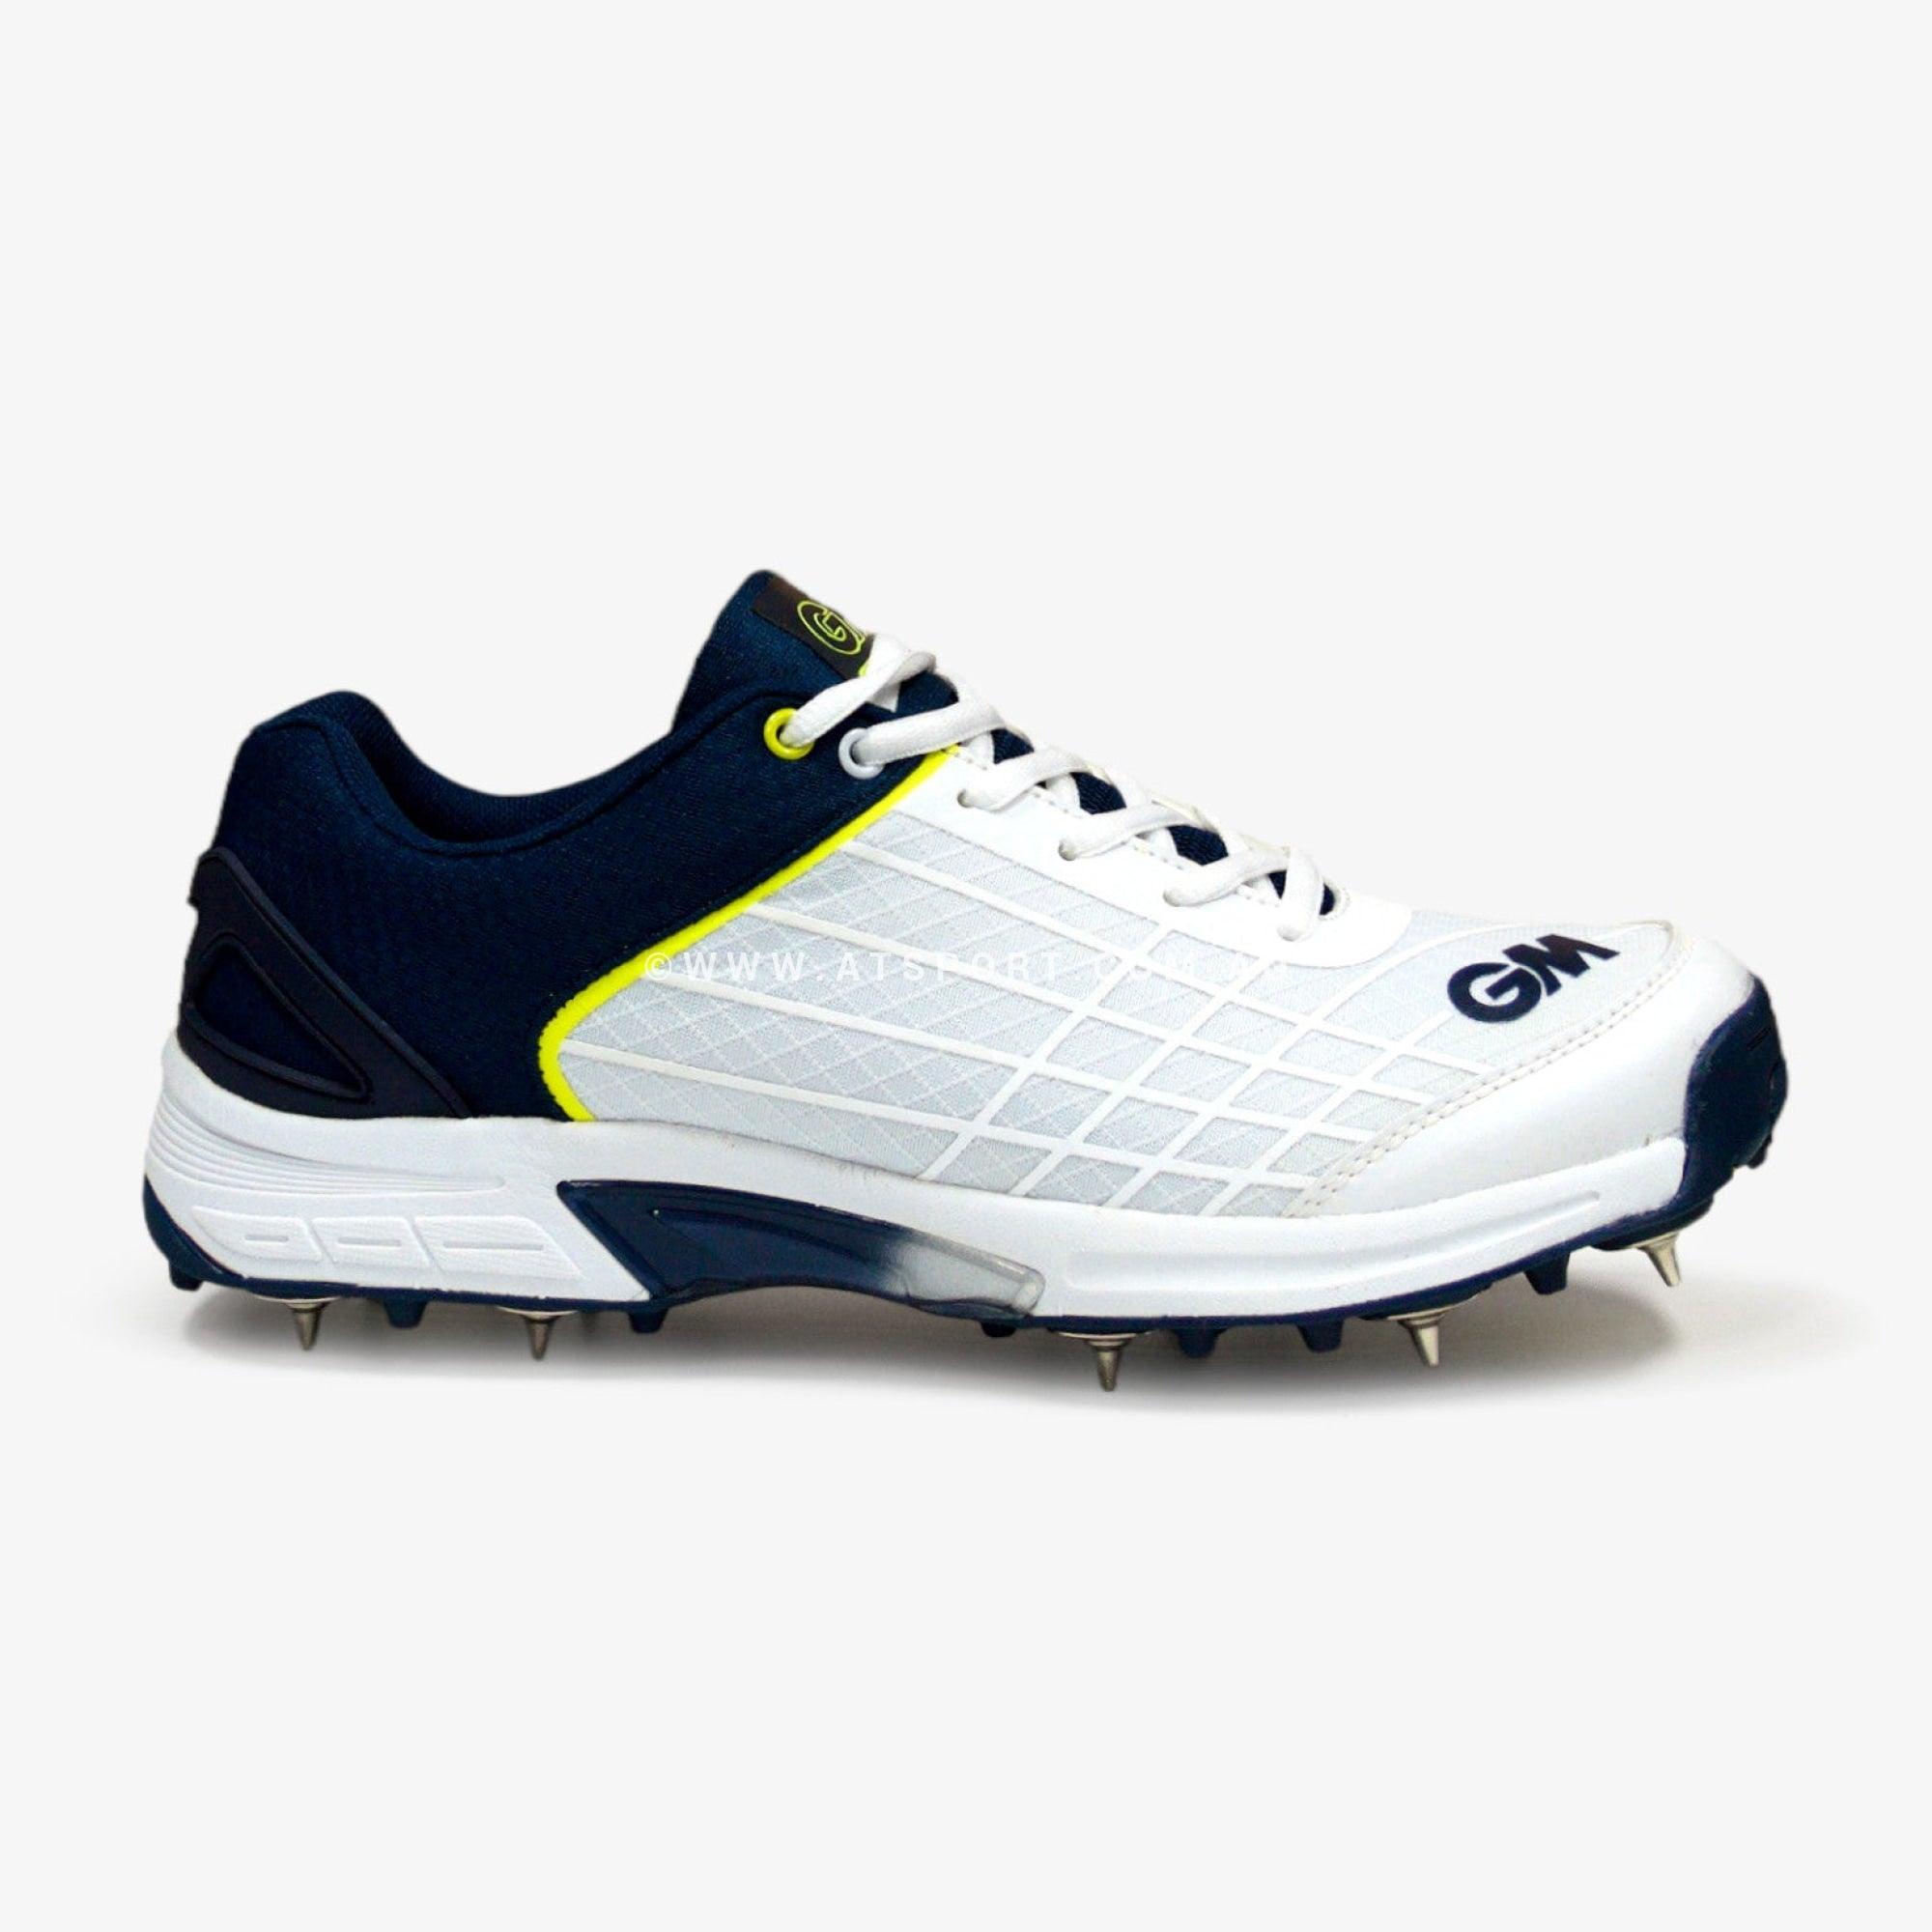 GM Original Spike Cricket Shoes - AT Sports